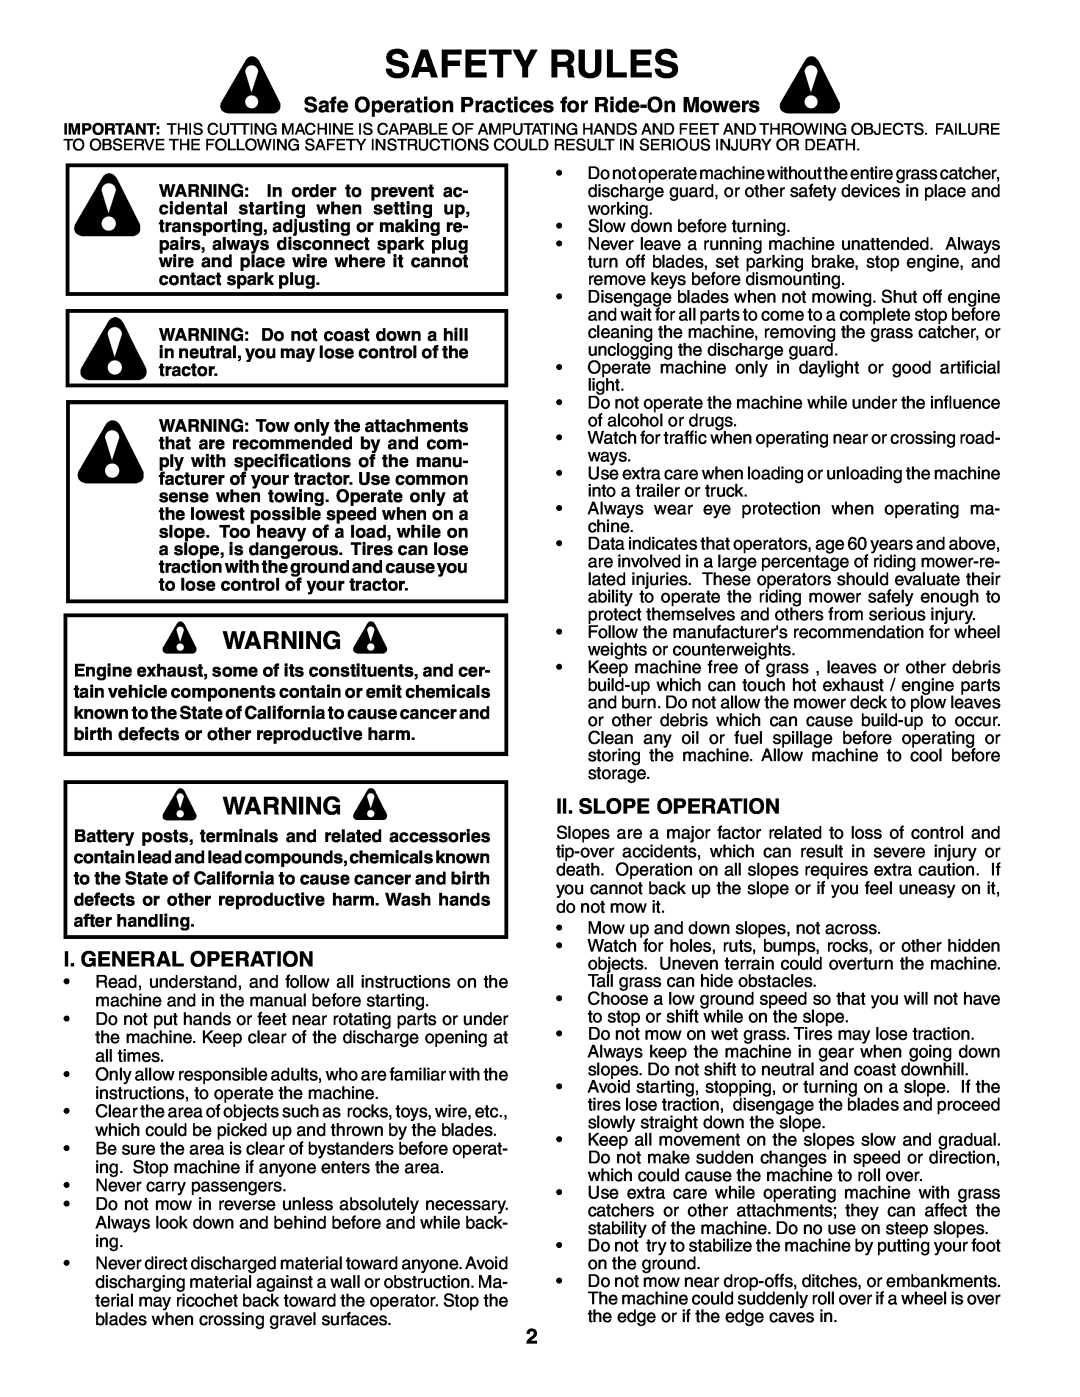 Poulan XT24H48YT Safety Rules, Safe Operation Practices for Ride-On Mowers, I. General Operation, Ii. Slope Operation 